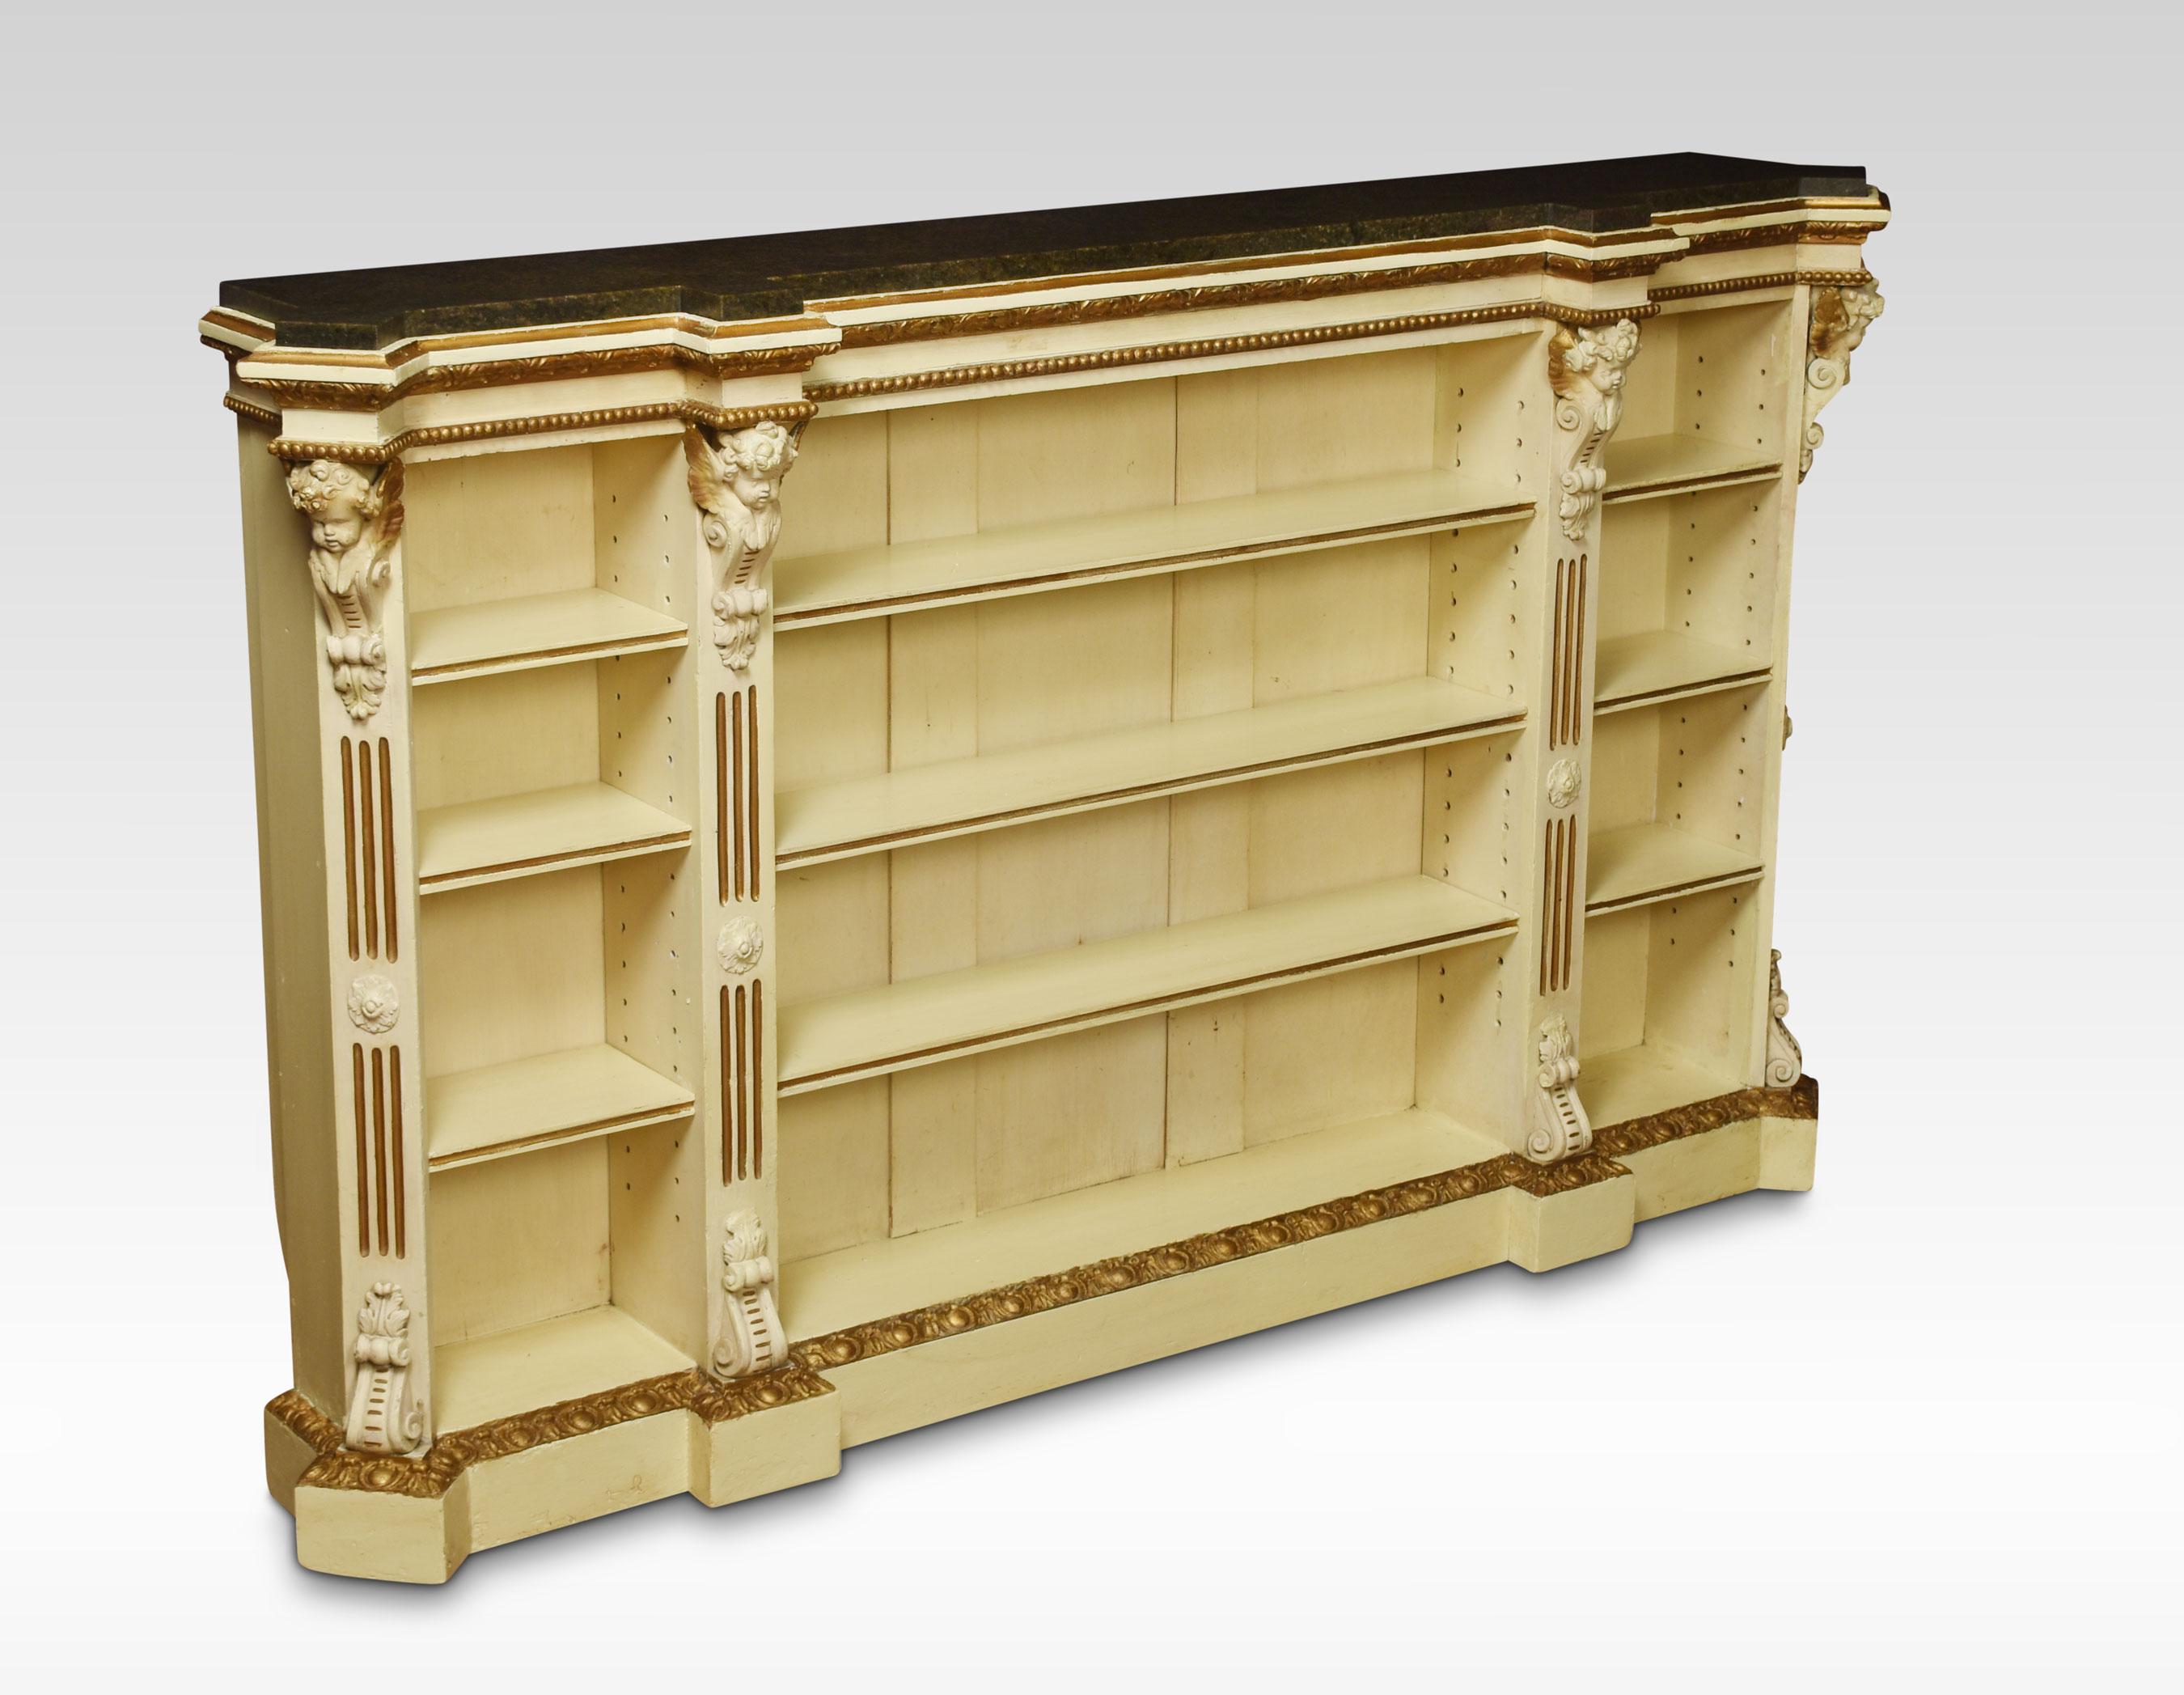 19th century gilded and painted open bookcase, the large rectangular inset marble top with canted corners applied with cherub mask brackets above gilt embellished fluted detail enclosing three bays of adjustable shelving. All raised up on a plinth